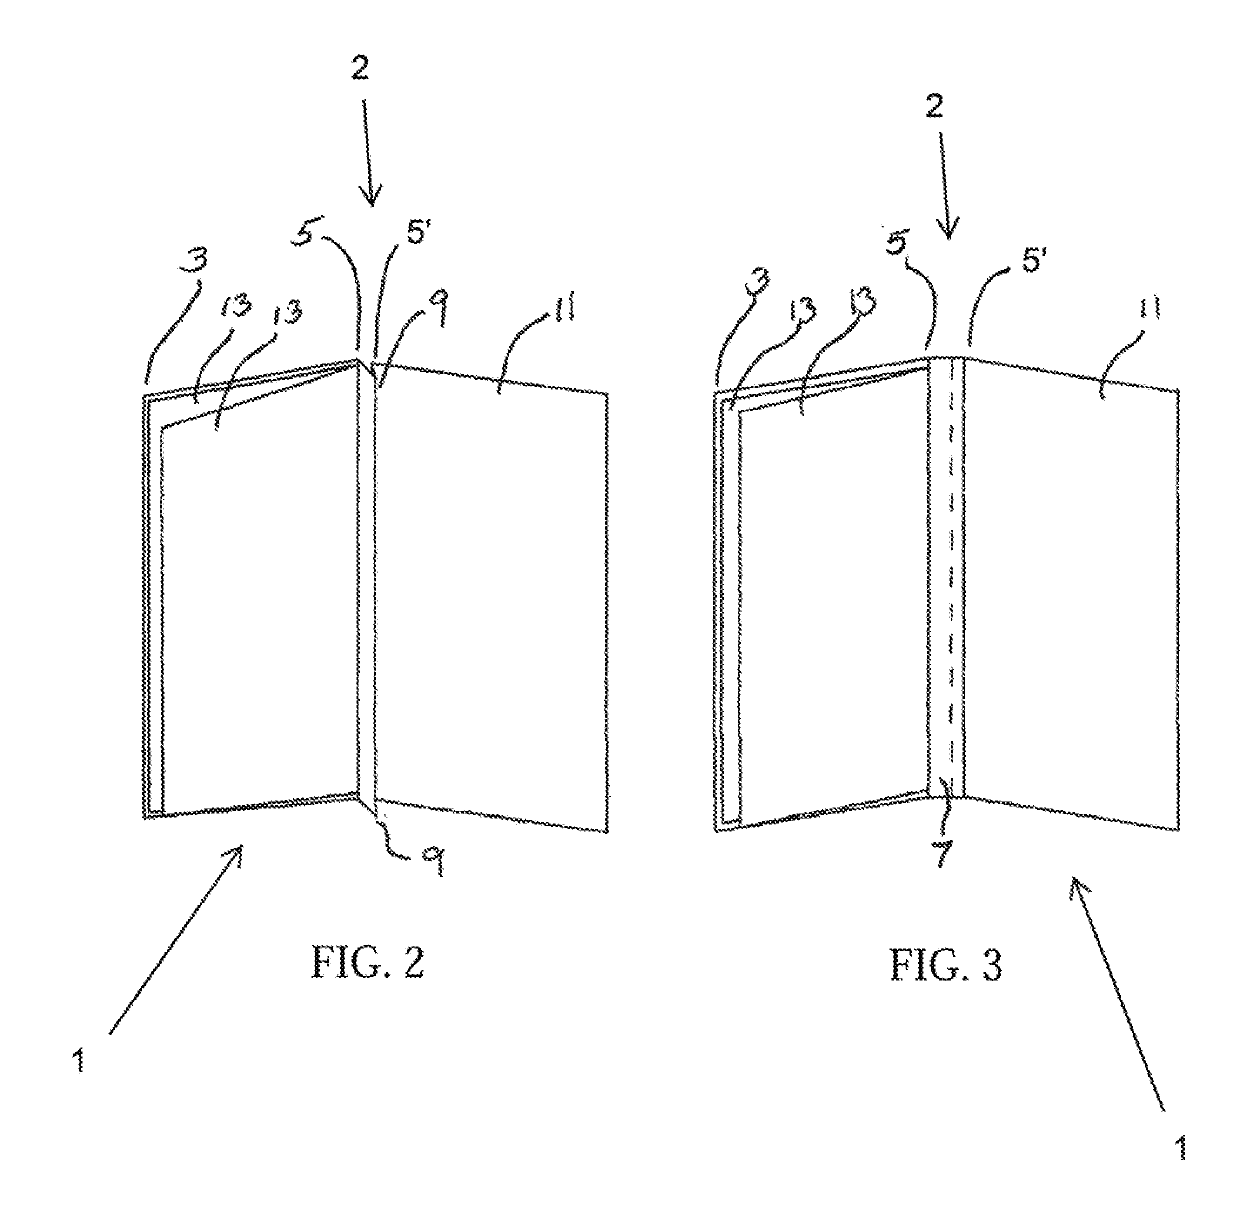 Greeting card having a configurable hinge that functions as a single hinge in a traditional greeting card mode, and as double hinge with a spine in an enhanced mode by which to cooperatively receive a recepticle to create an enhanced greeting card